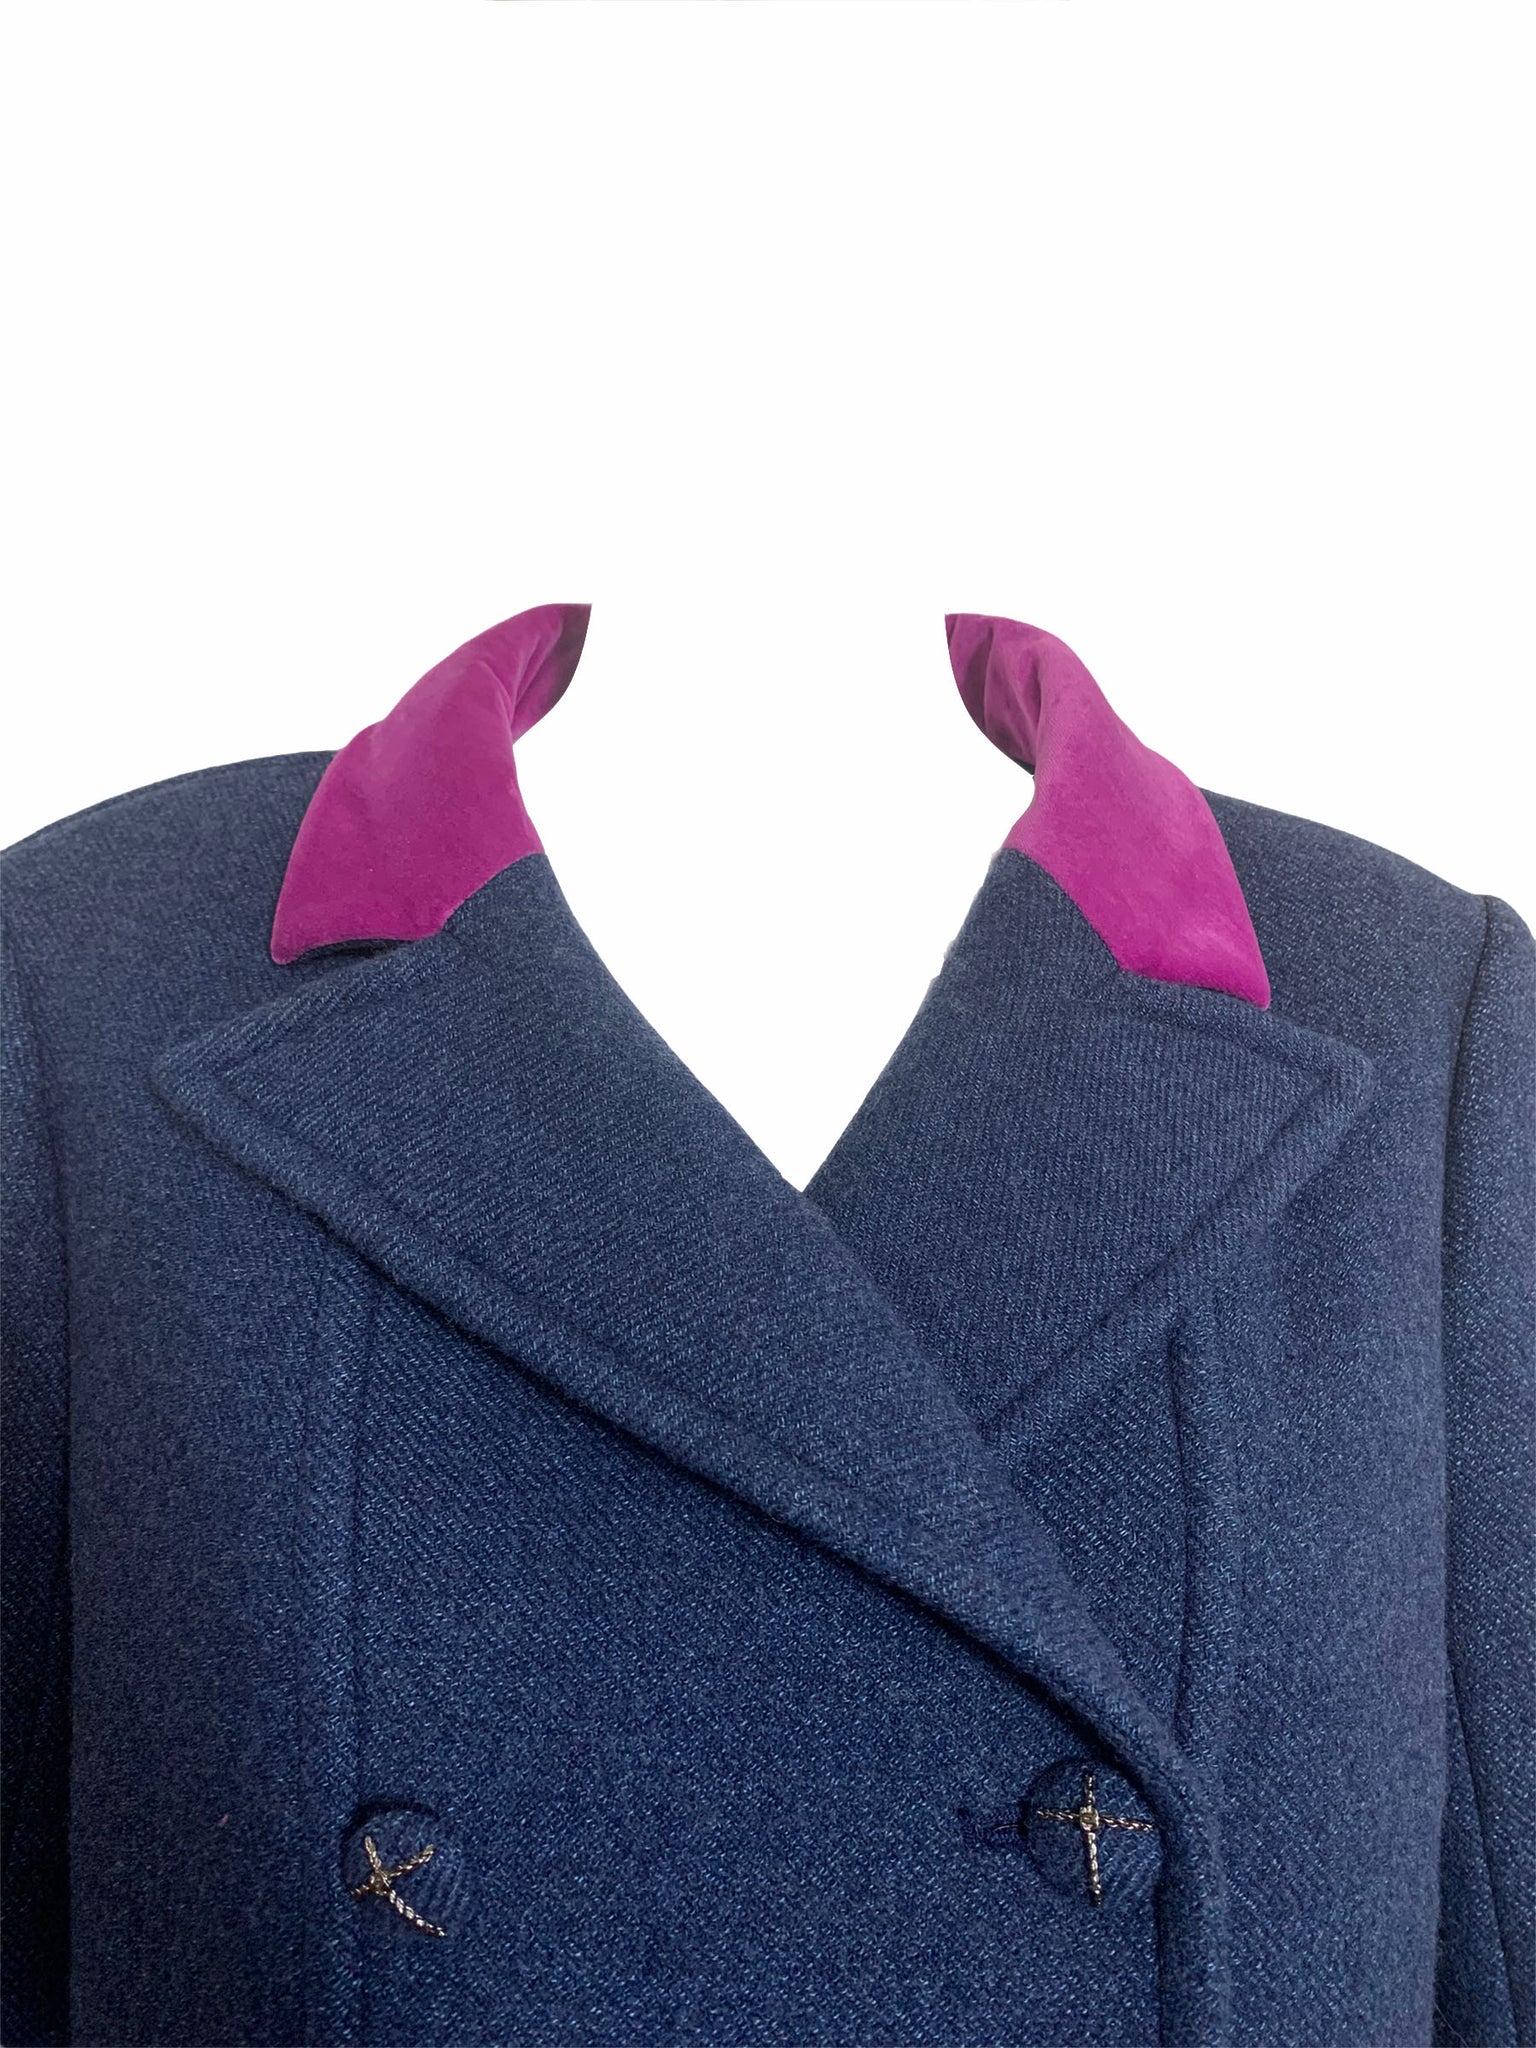  Chanel Early 2000s Cashmere Wool Blend Coat with Velvet Trim DETAIL 4 of 5